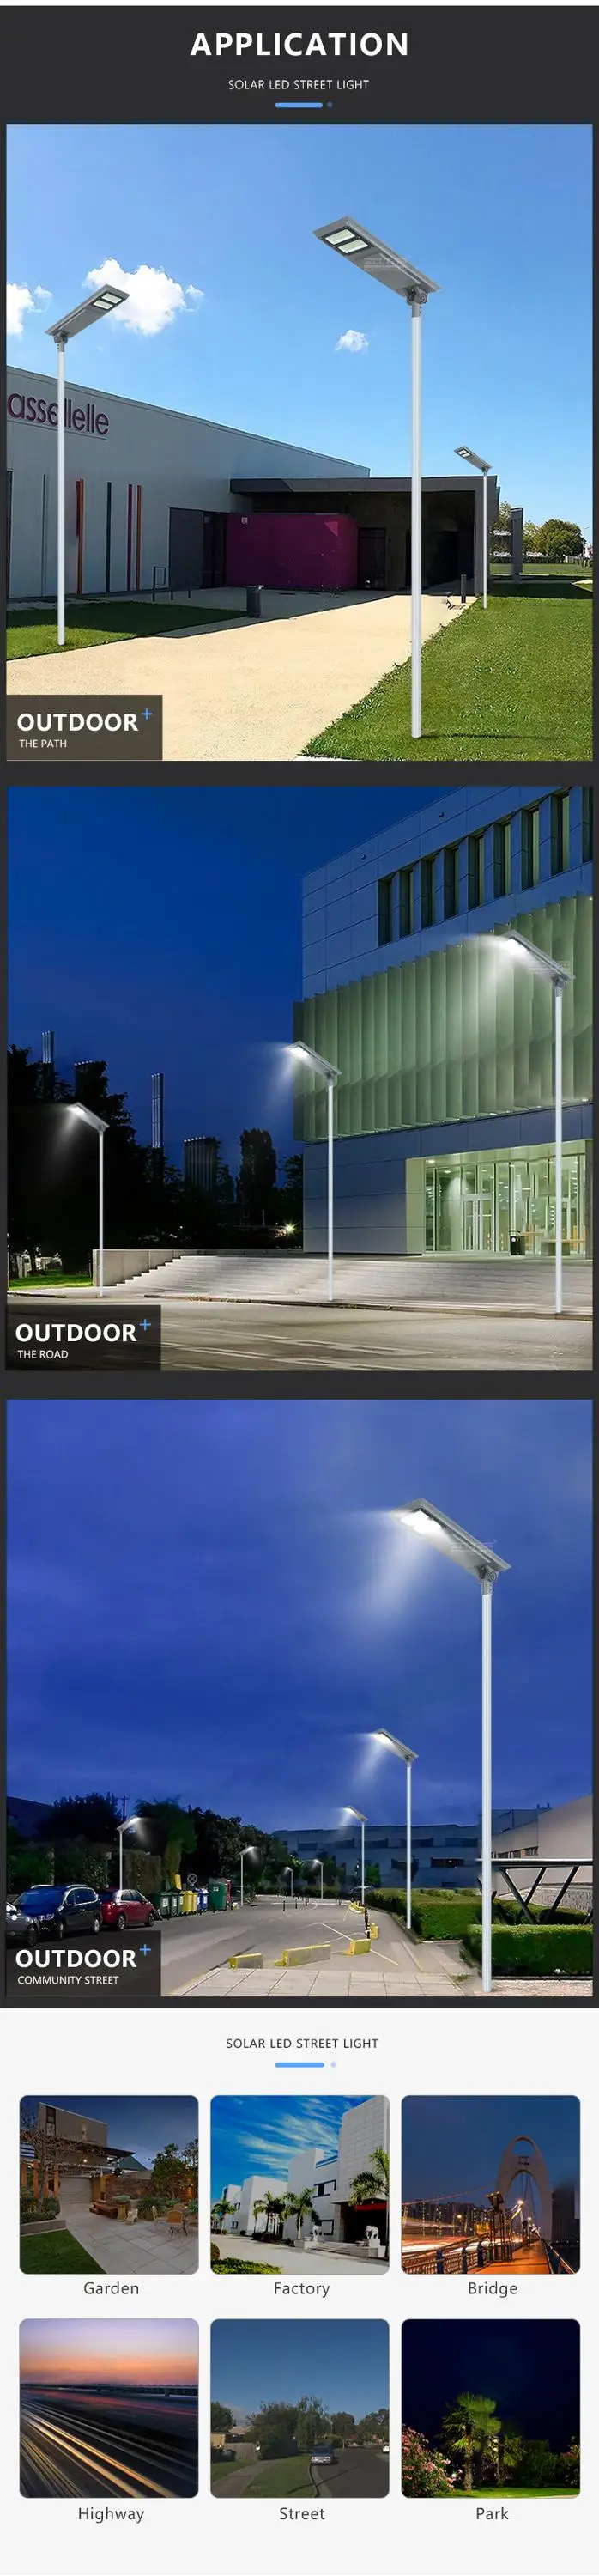 ALLTOP Outdoor lighting IP65 waterproof 100w integrated all in one led solar street light